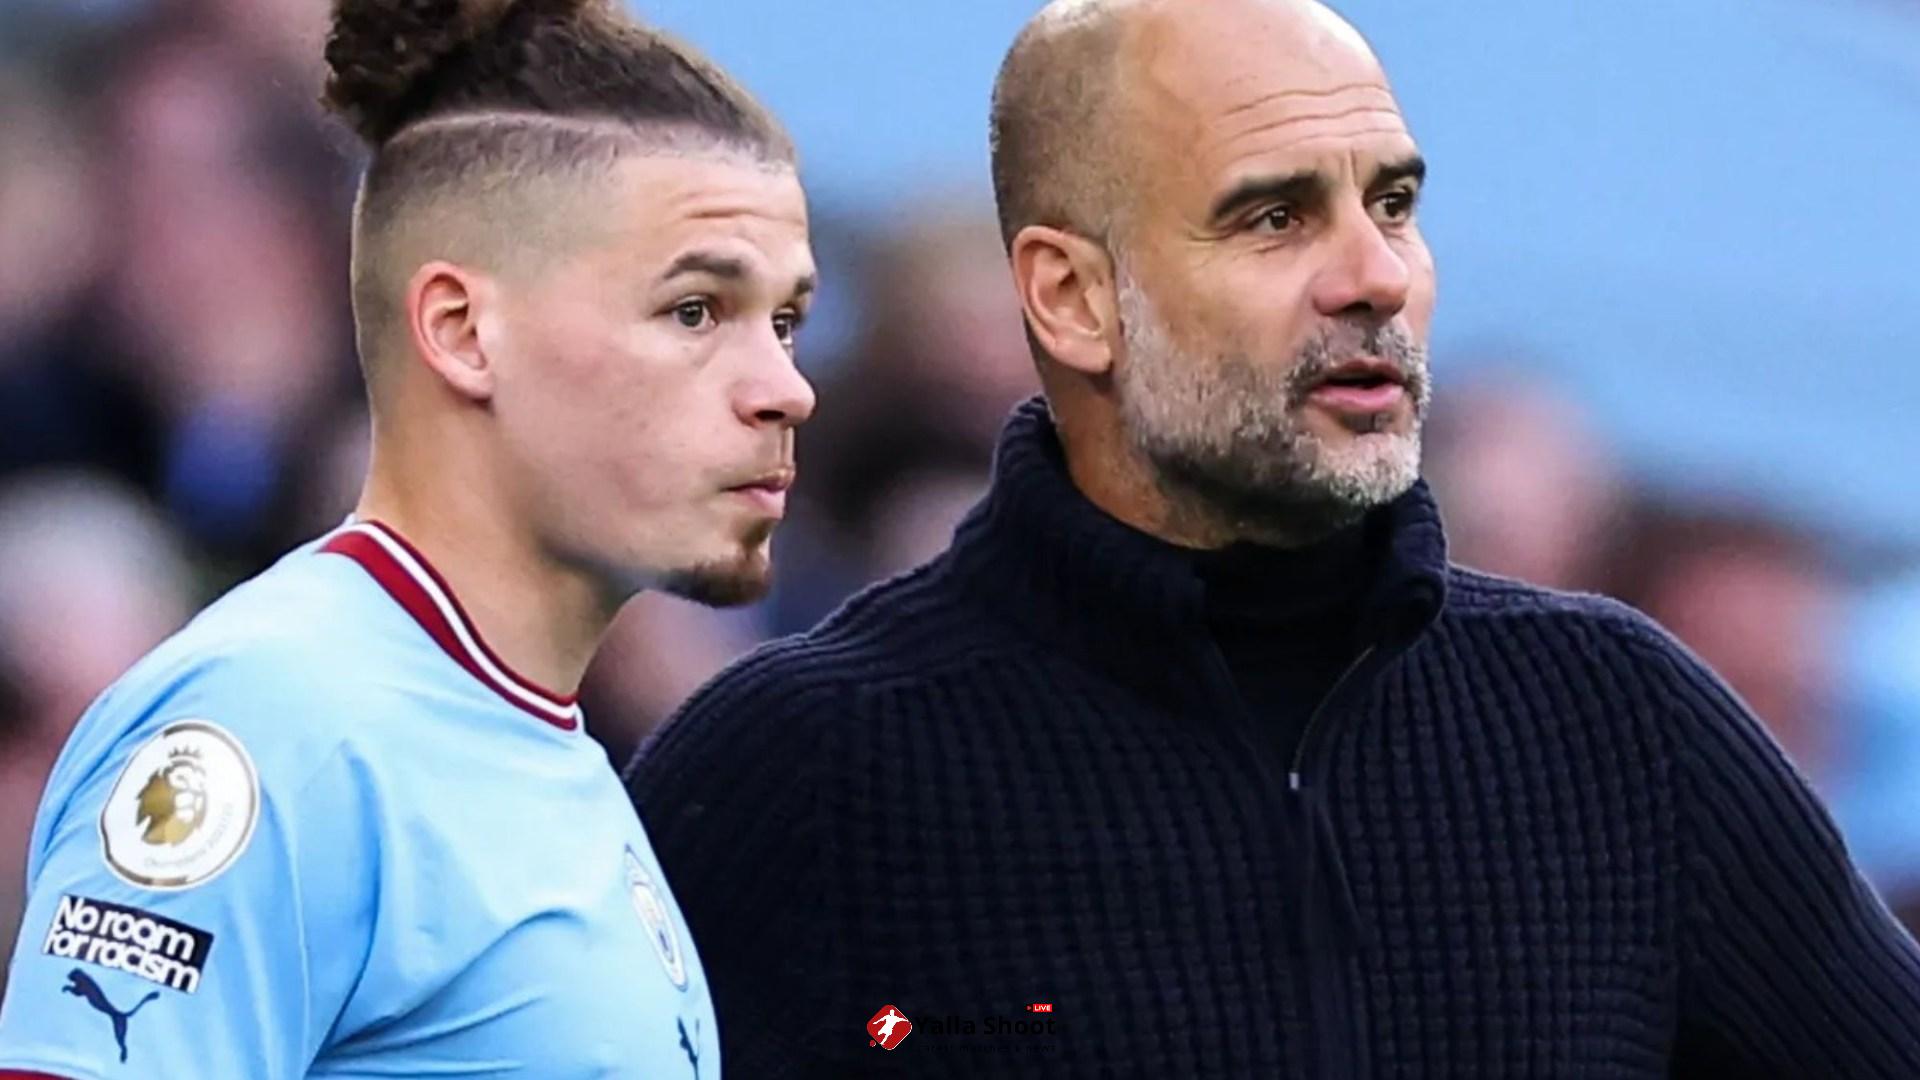 Pep Guardiola and Man City staff had 'concerns' about Kalvin Phillips within a month of Man City transfer